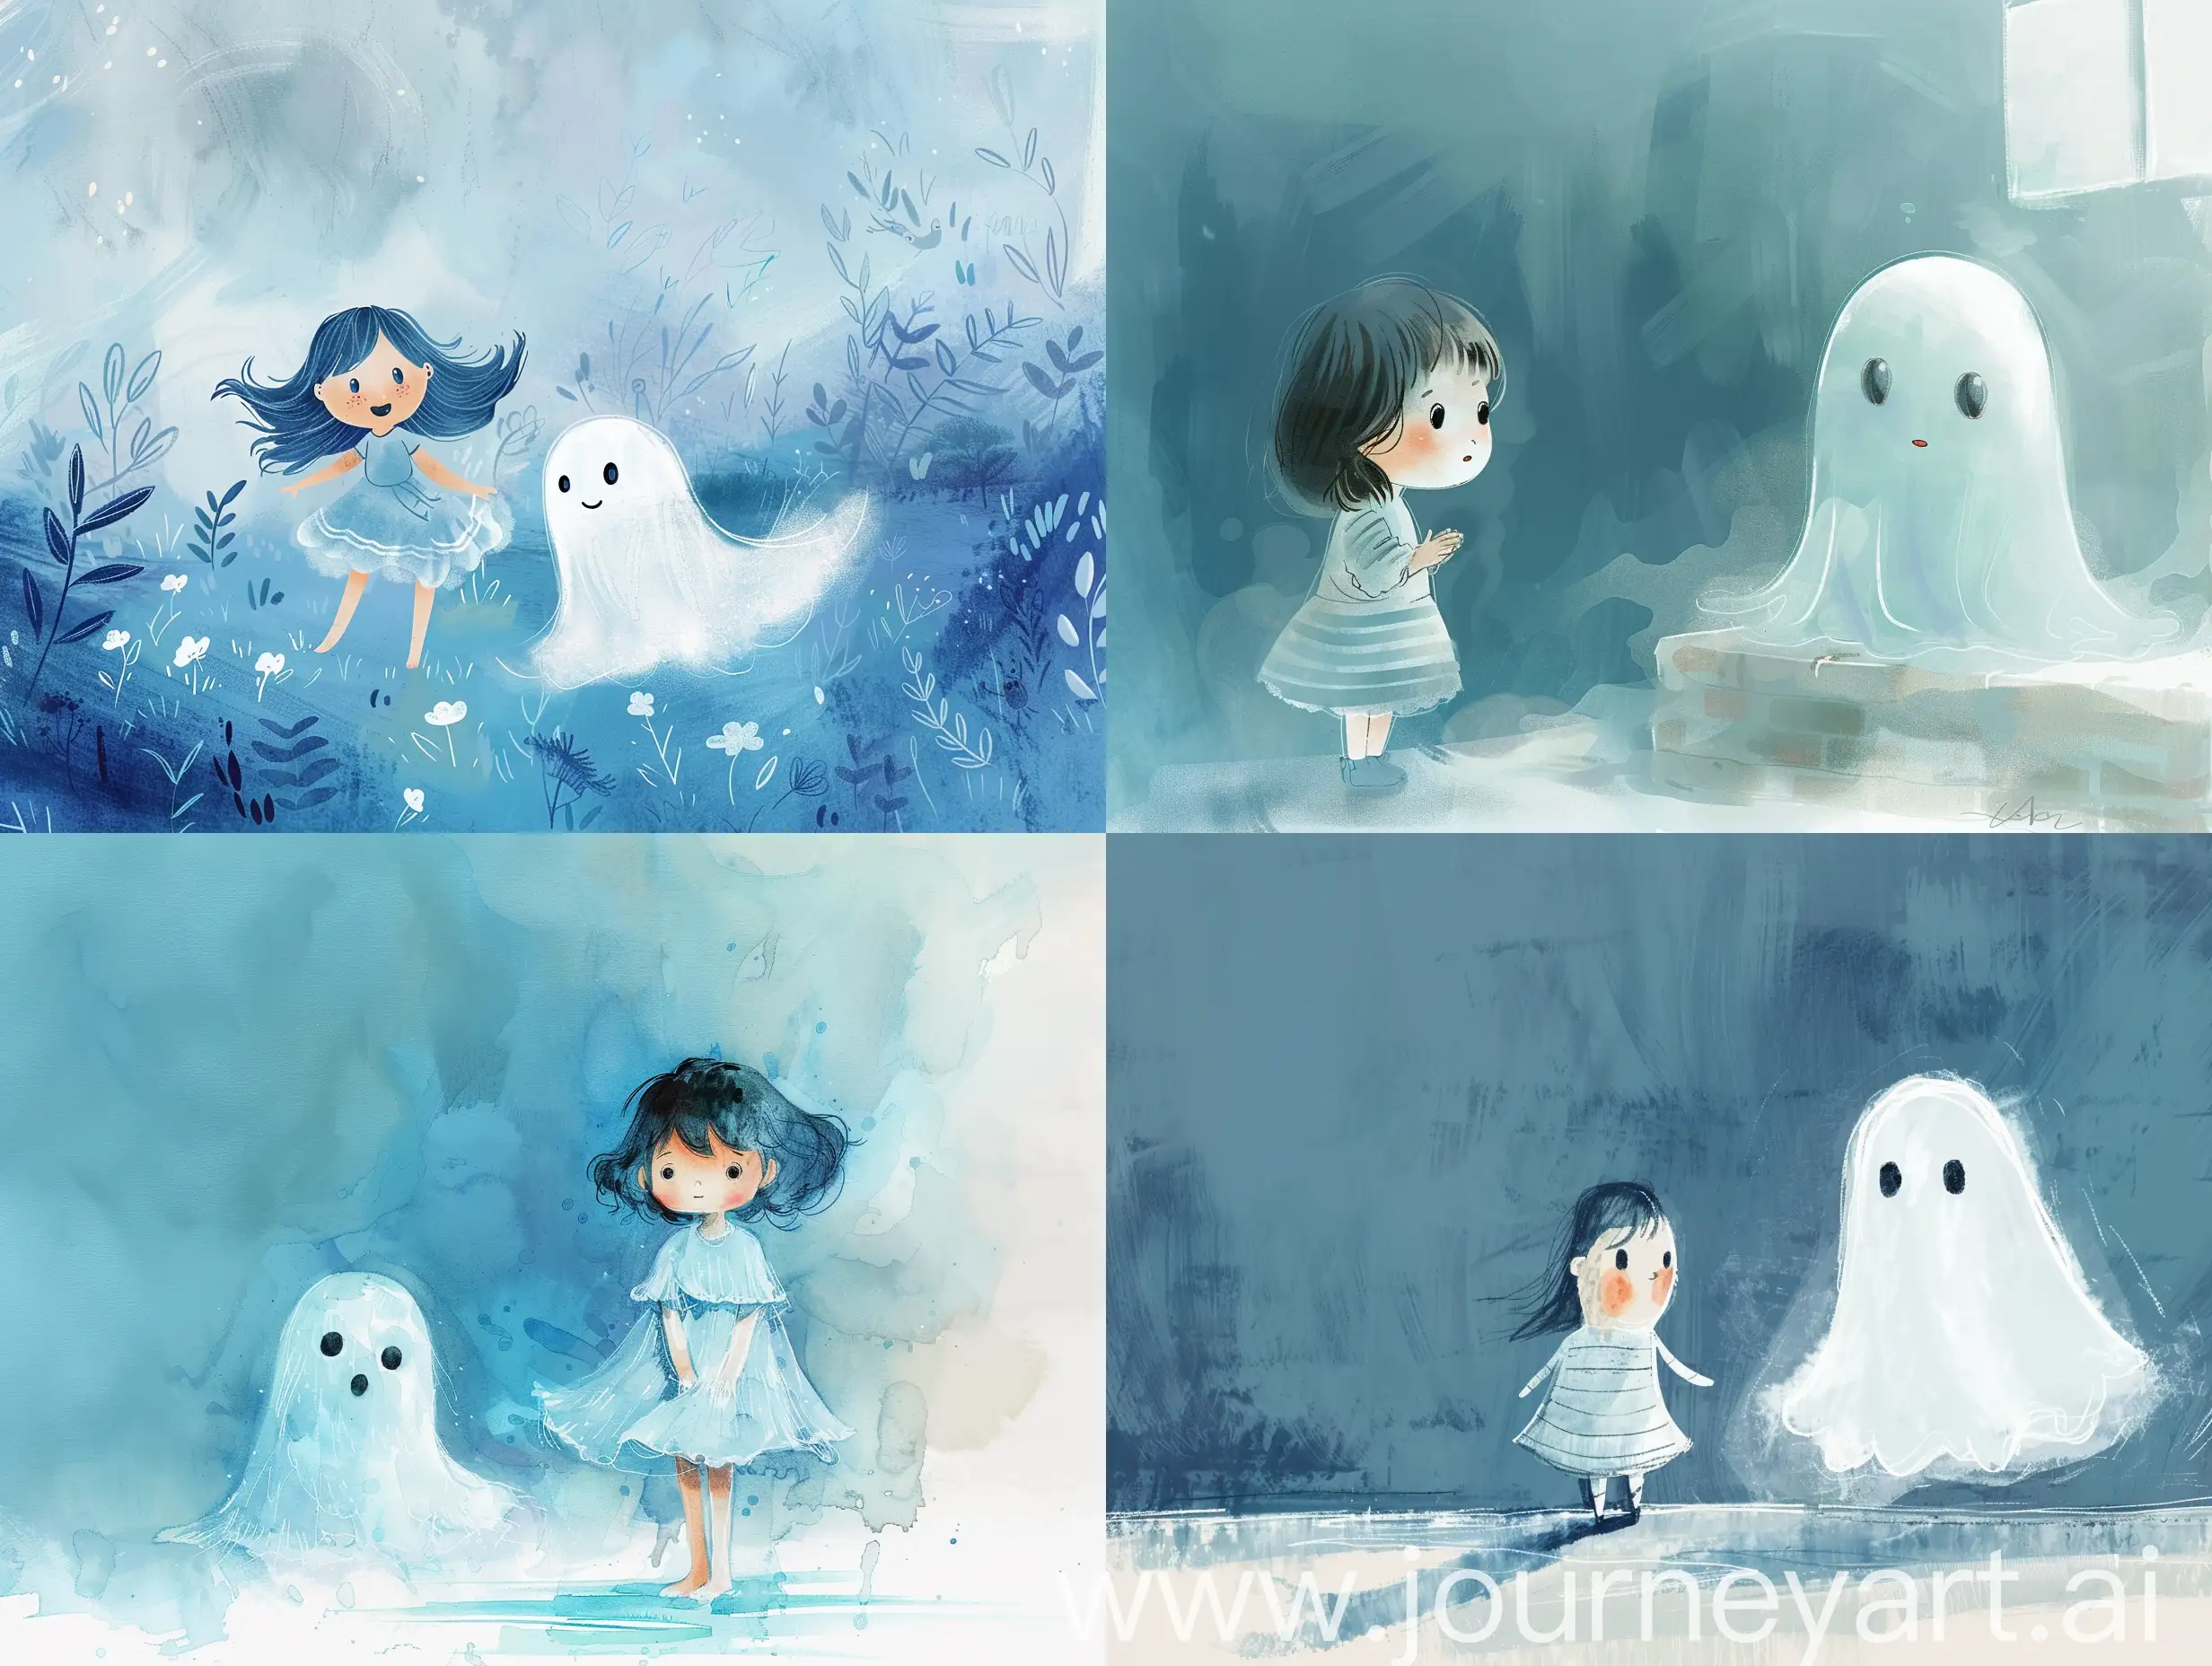 Adorable-Little-Girl-with-Ghost-Whimsical-Blue-Illustration